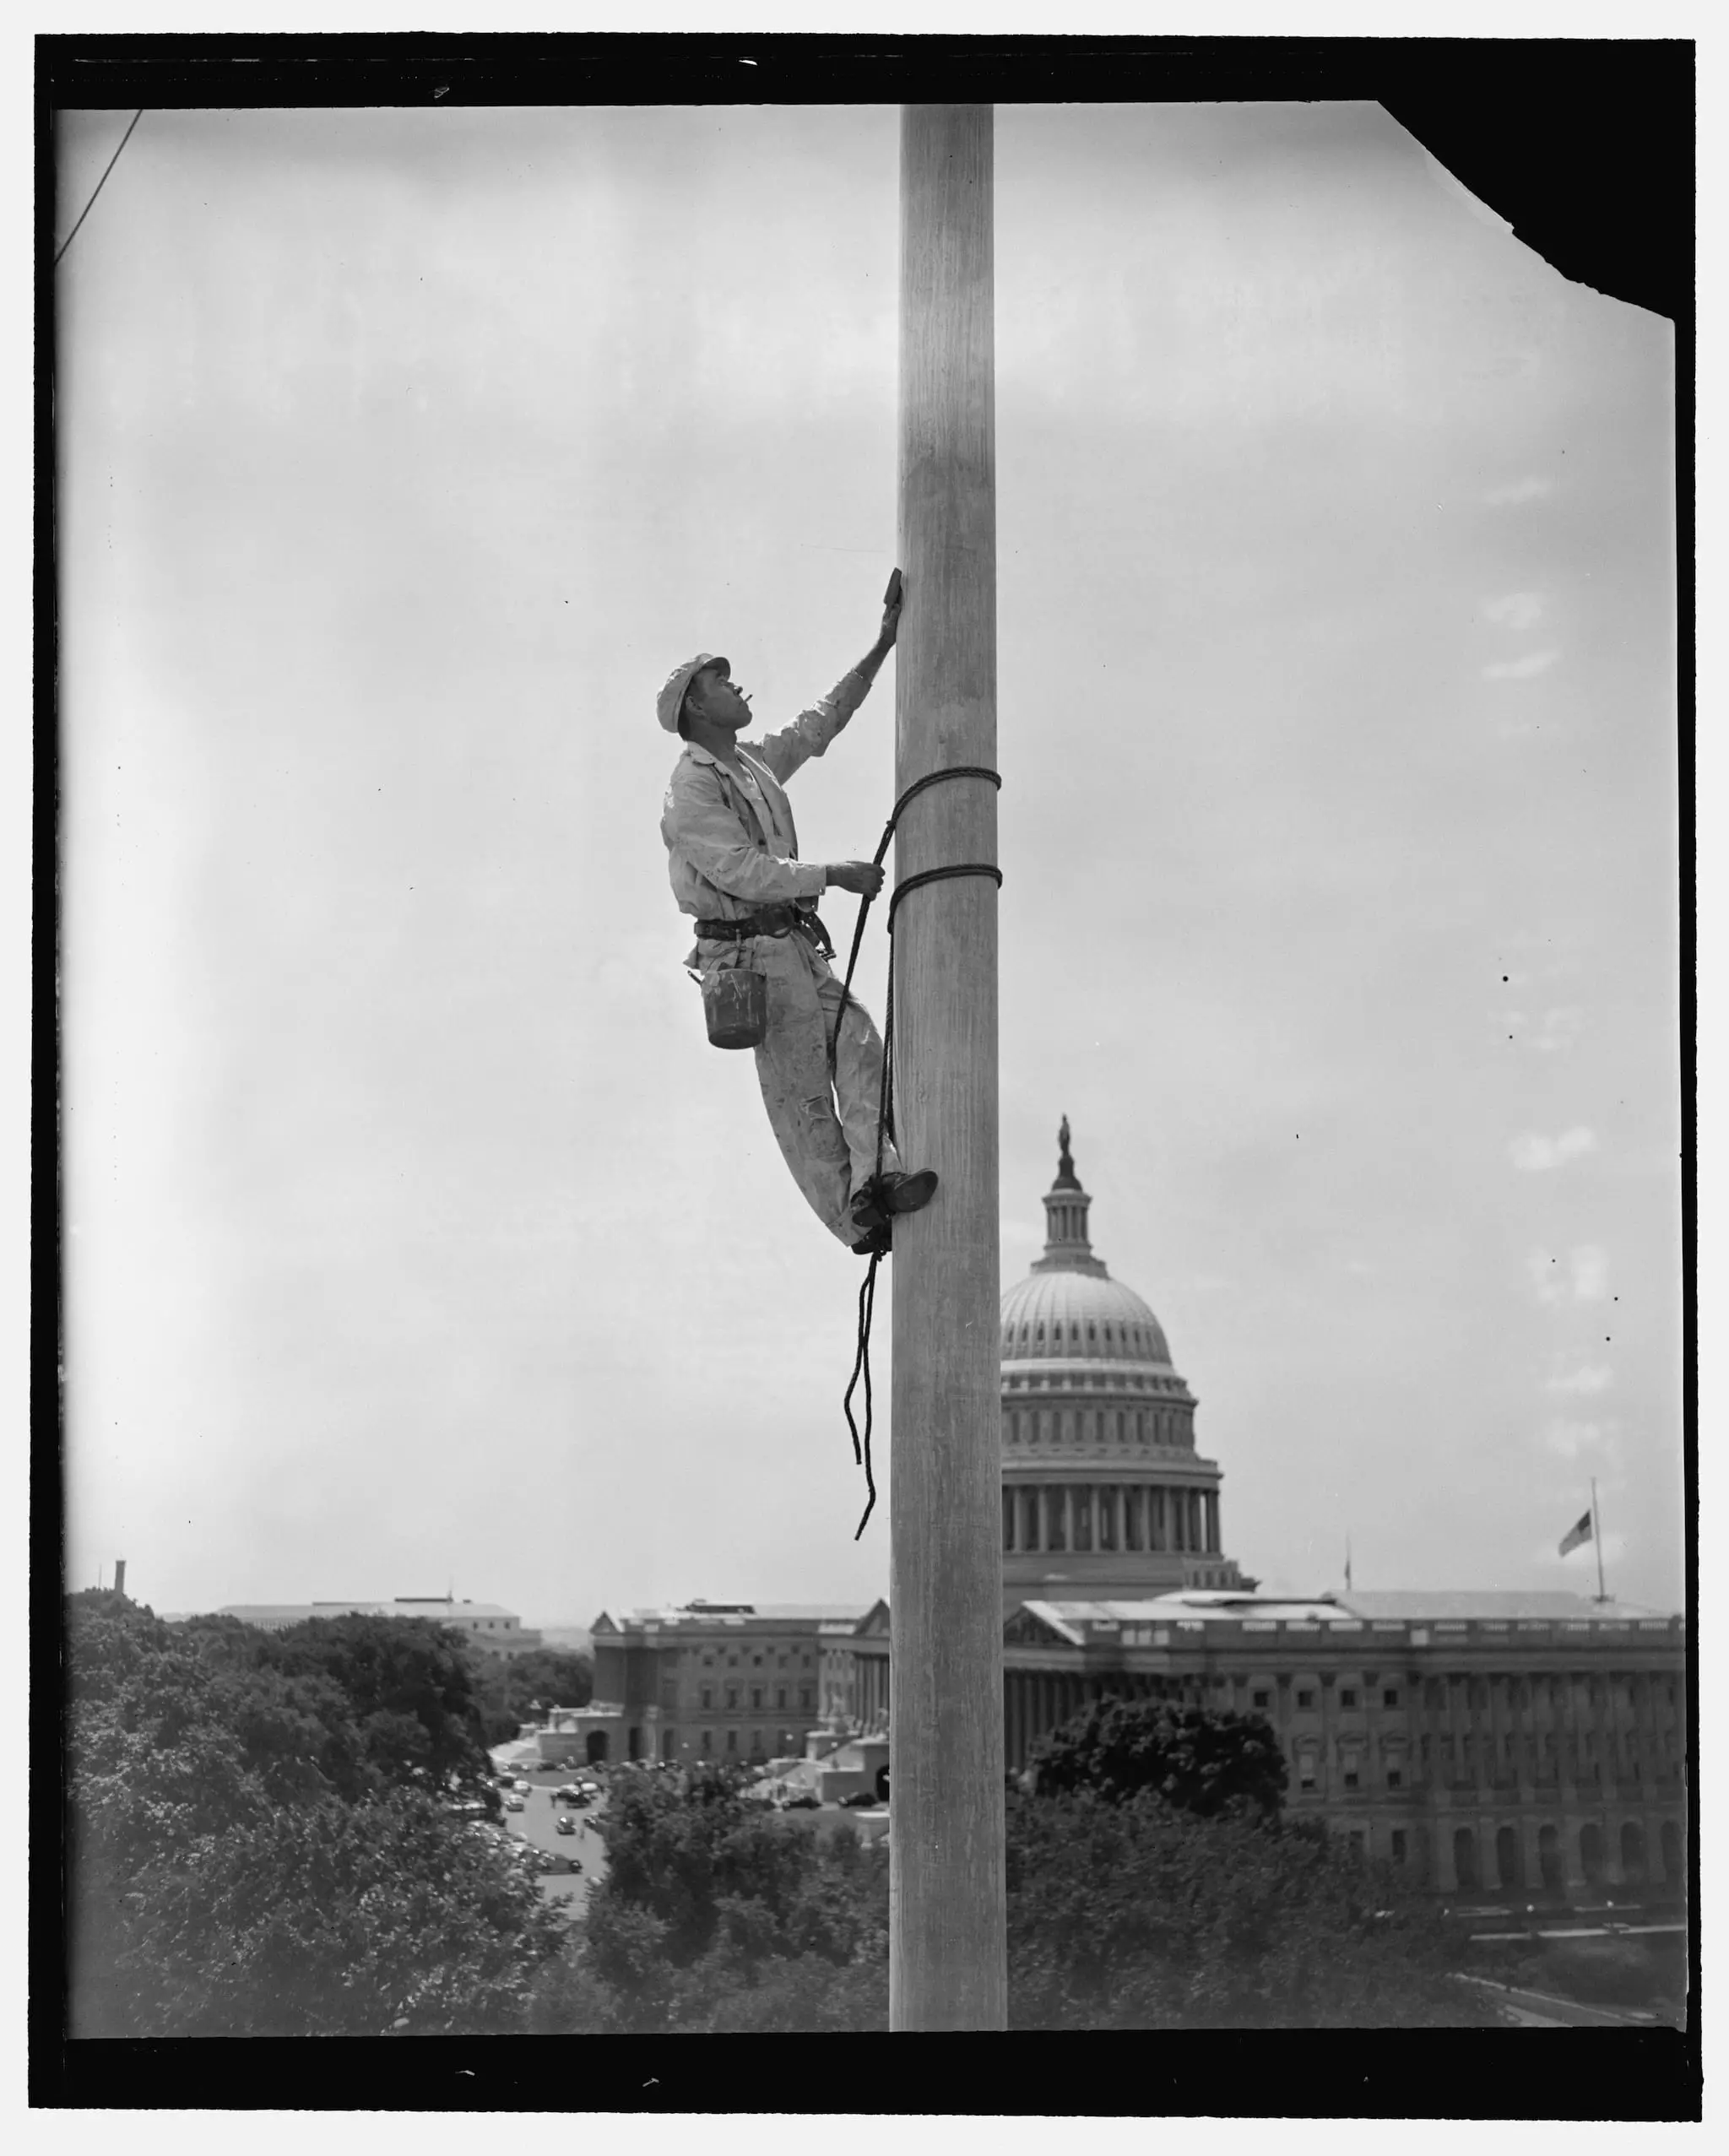 Washington, D.C., July 11, 1939. There comes a time each year when things around Capitol Hill need a bit of fresh paint, flagpoles no exception. Here is the flagpole over the Senate Office Building getting its new paint job, curiously enough, from a steeple-jack named Tarzan--Jack Tarzan